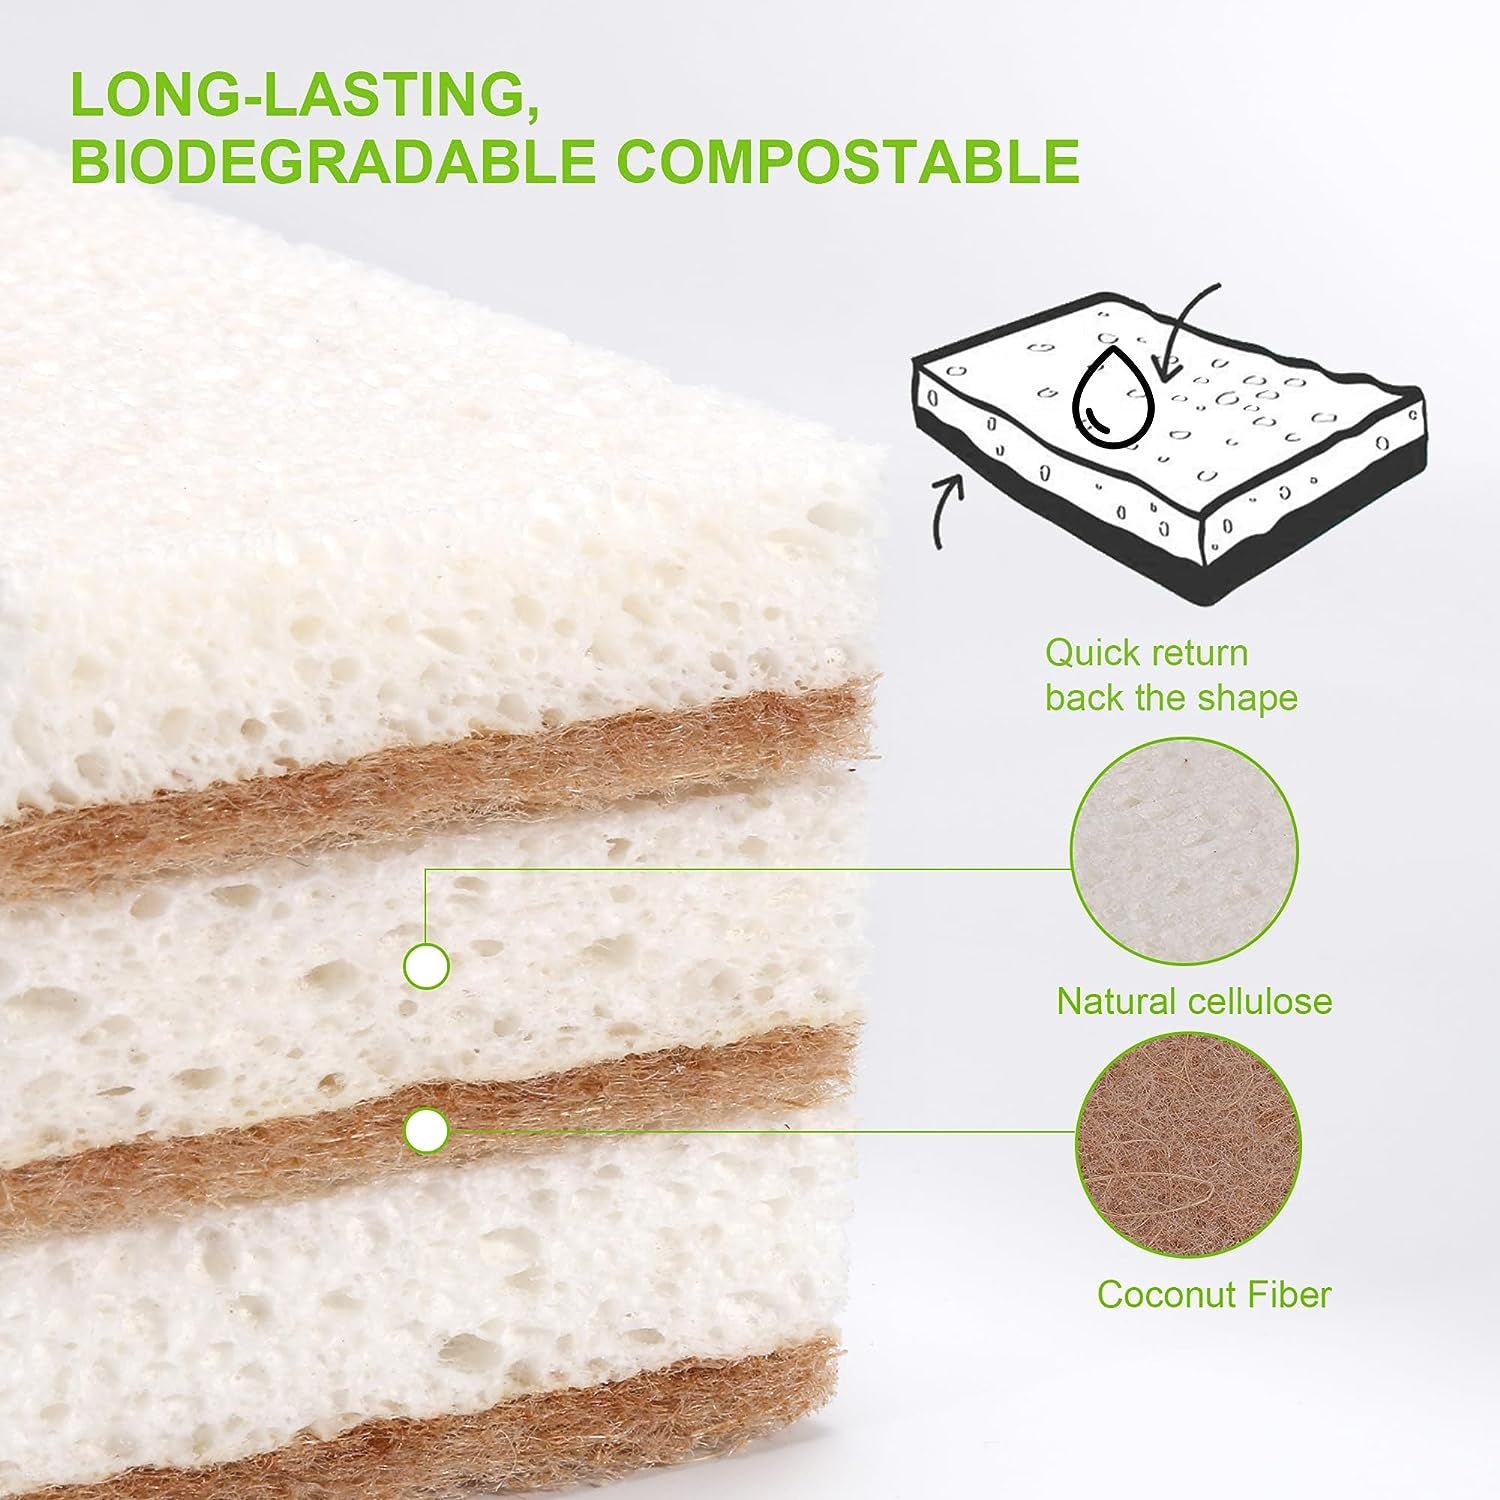 Natural Sponge 16 Pack - Biodegradable Compostable Cellulose Kitchen Sponges Coconut Scrubber - Eco Friendly Sponge for Dishes Cleaning